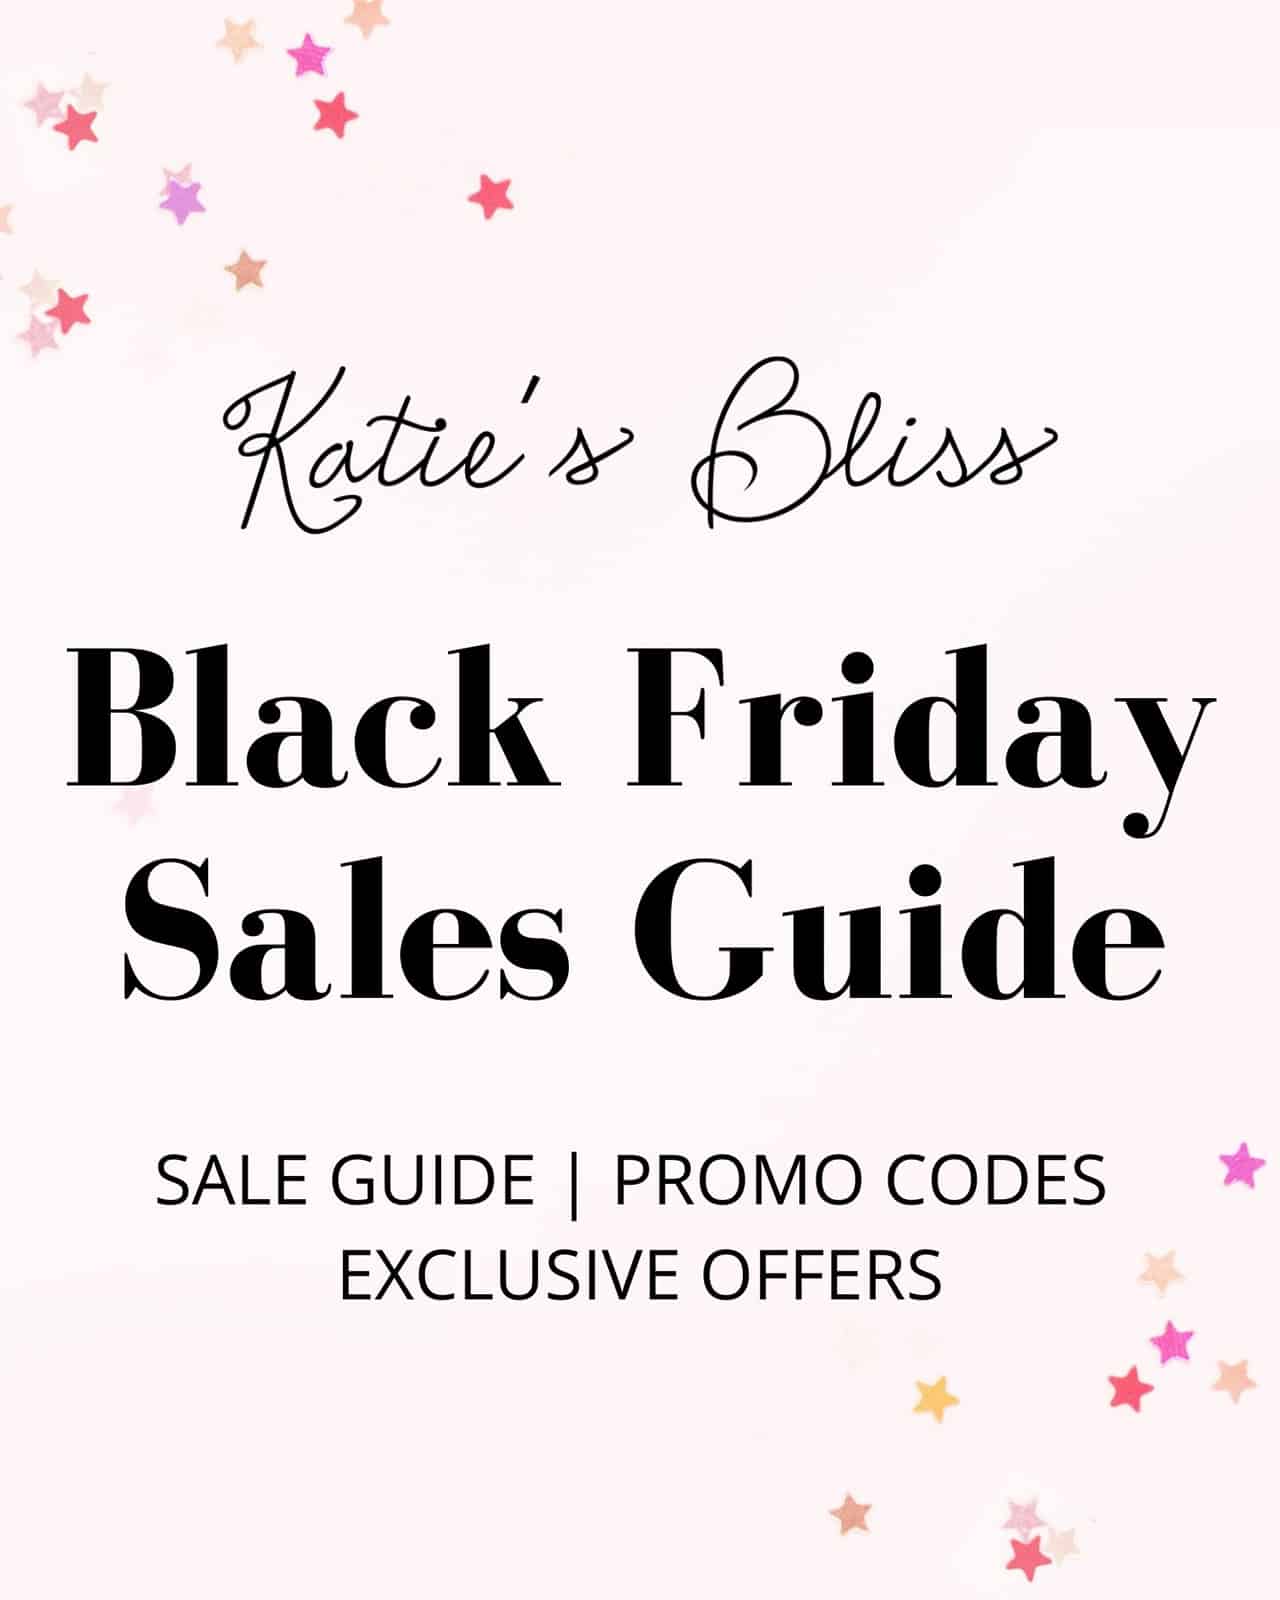 Katies Bliss Black Friday Sale Guide